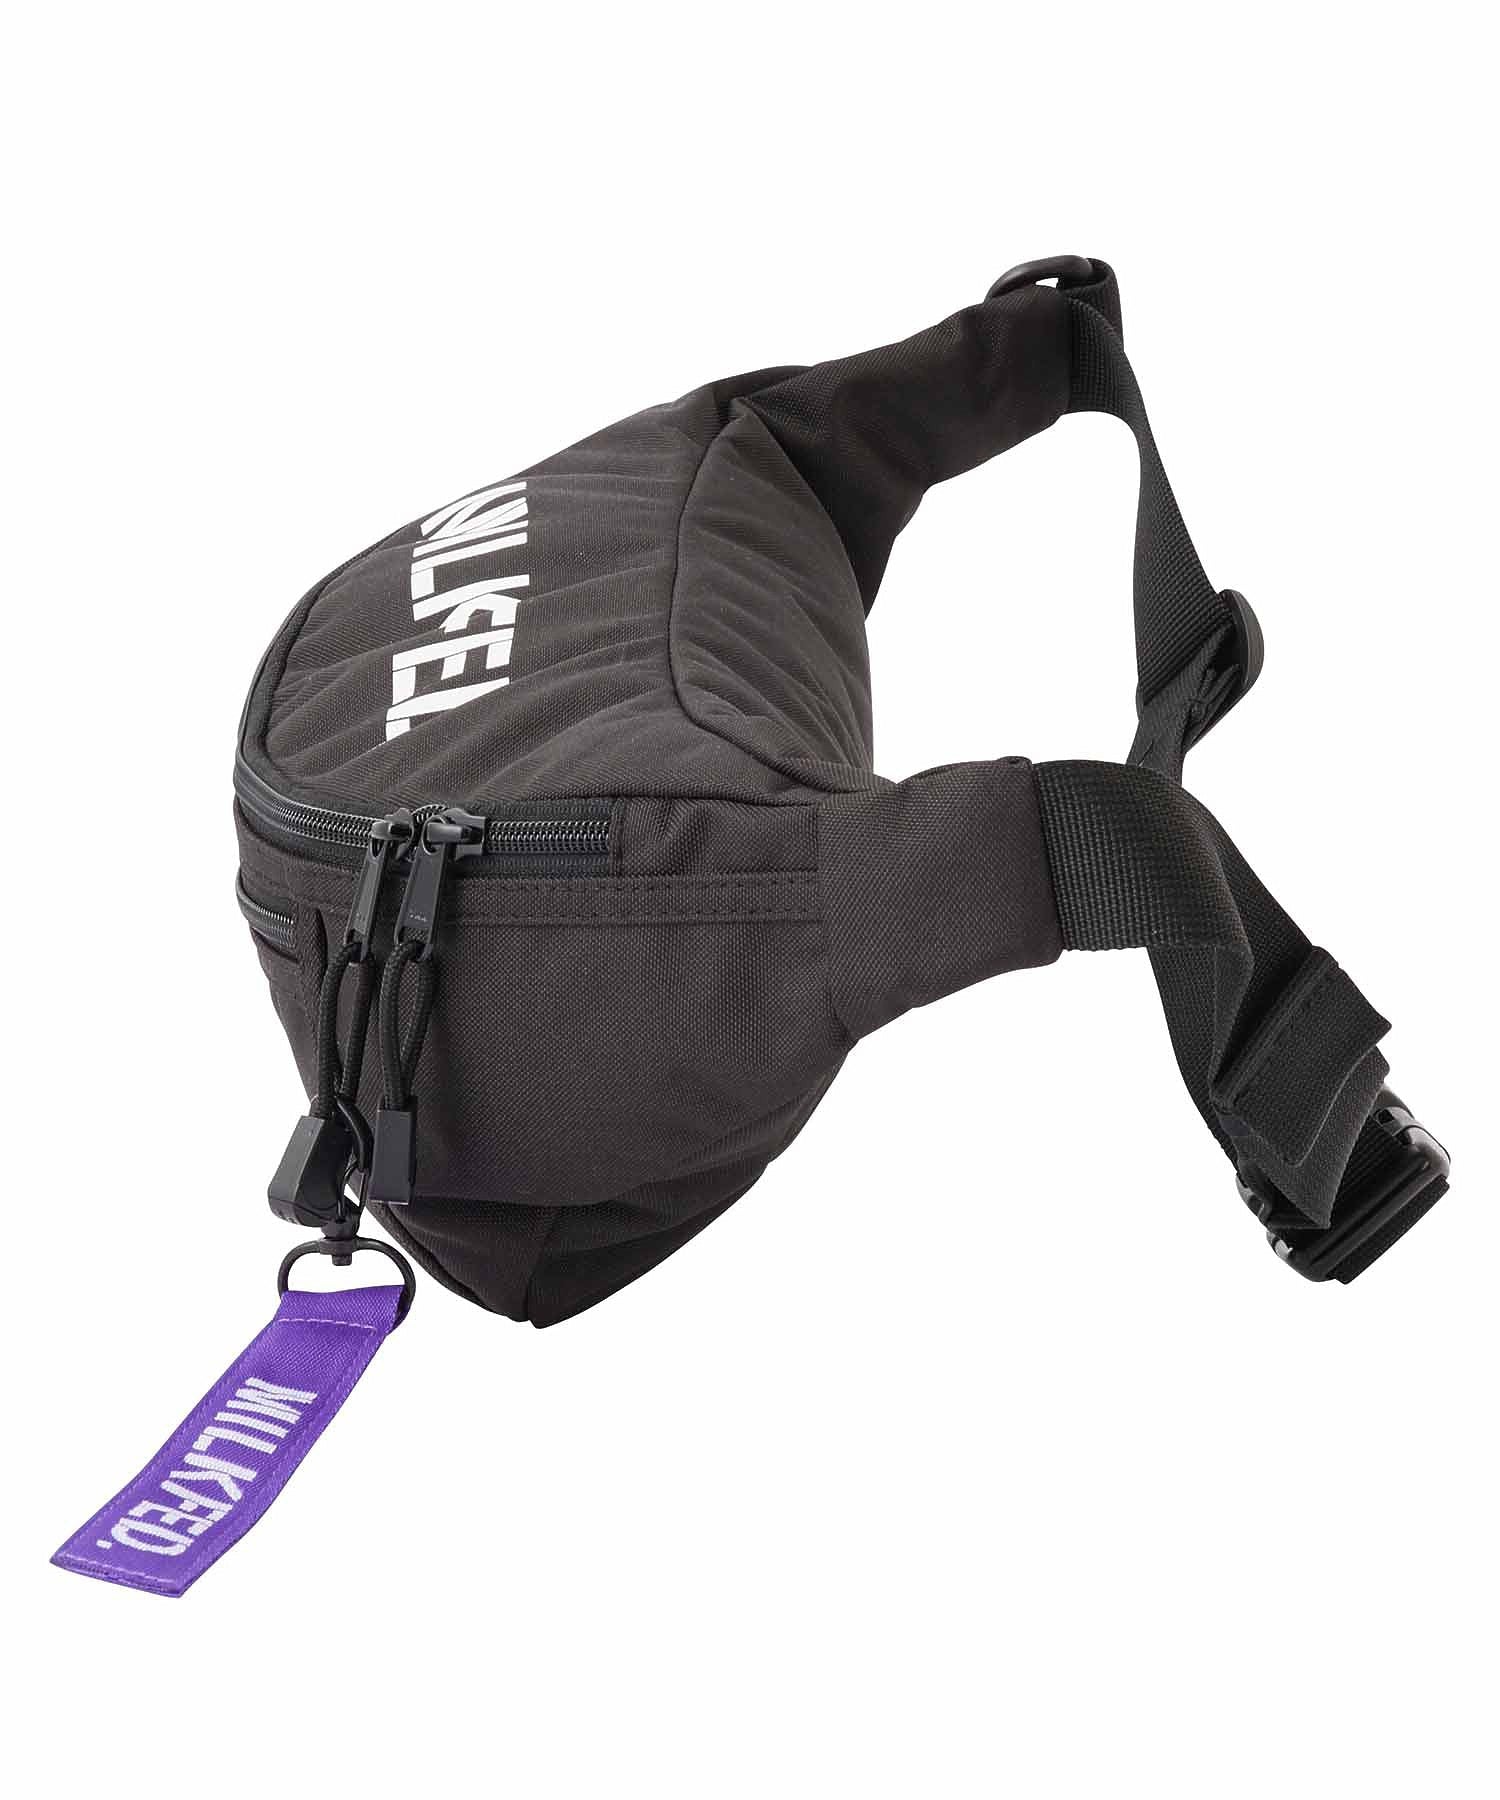 TOP LOGO FANNY PACK LIMITED PURPLE MILKFED.